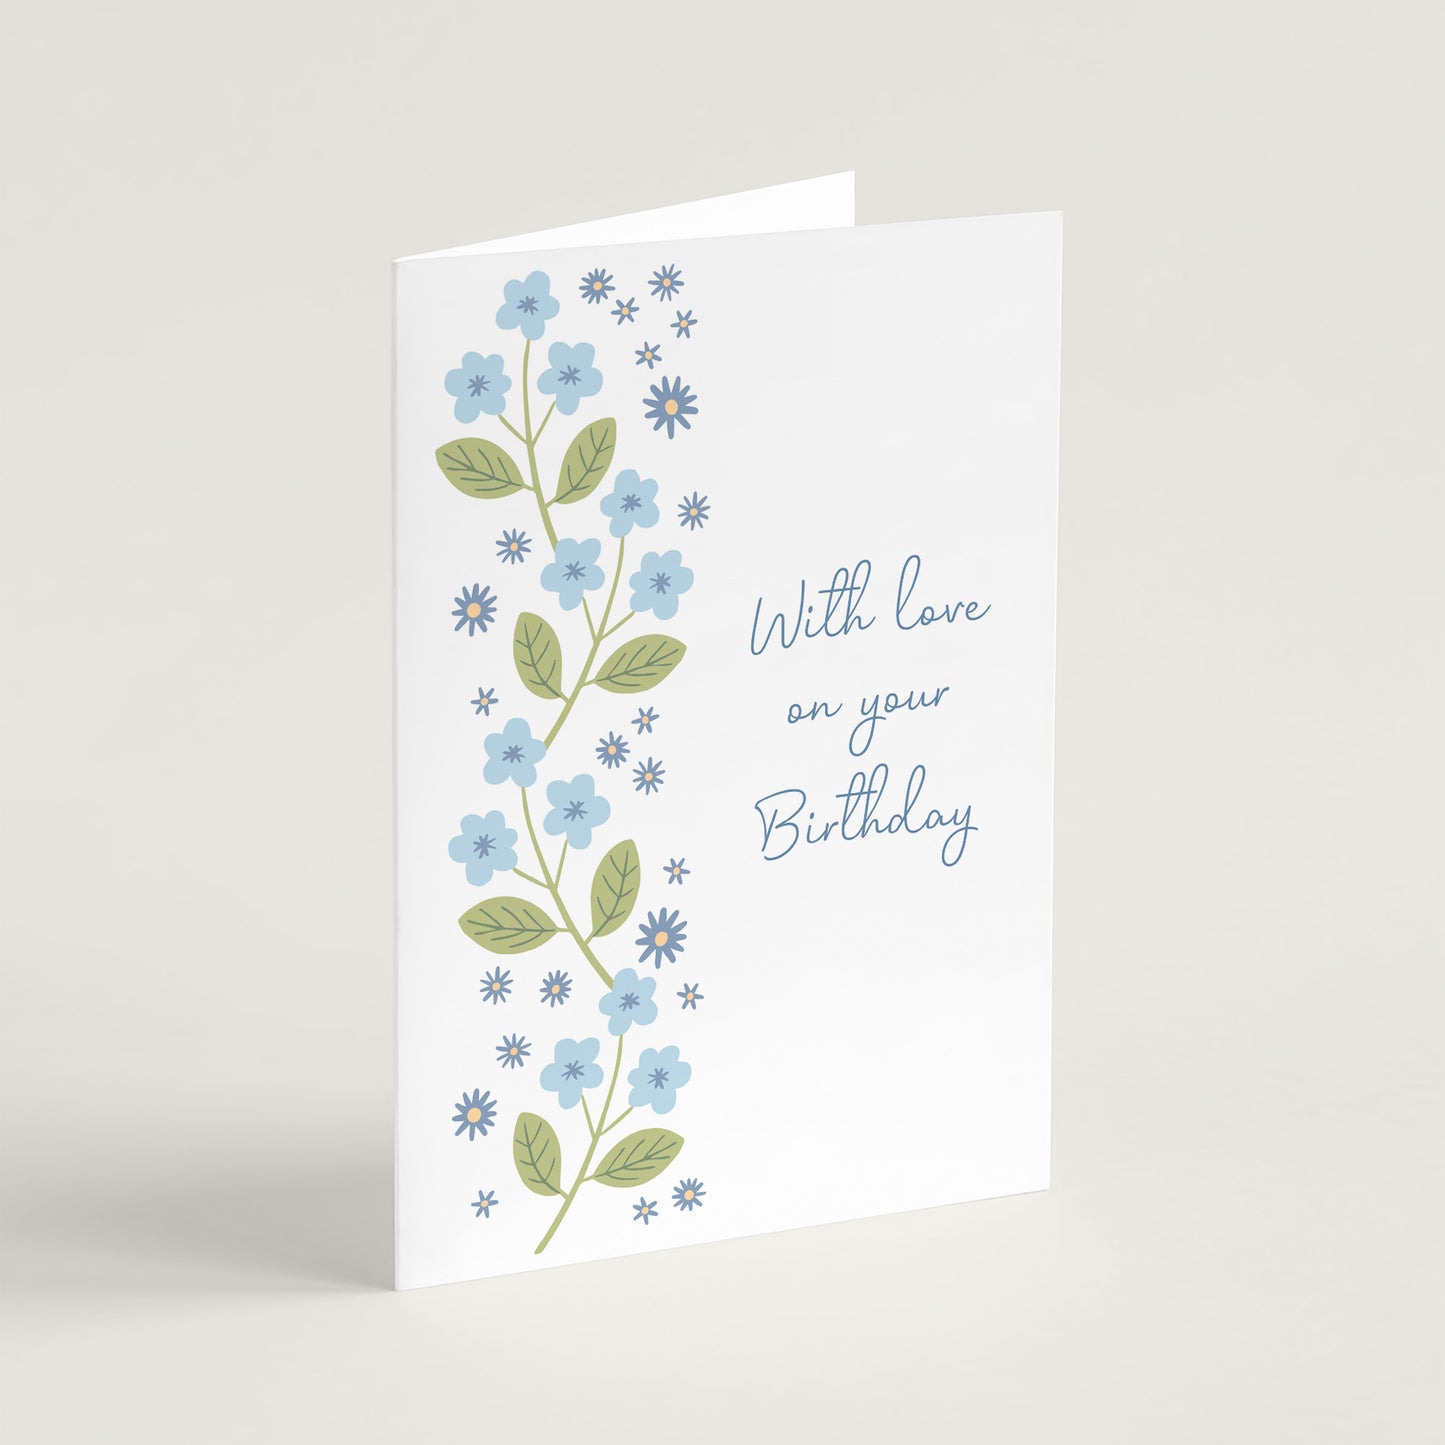 'With Love' Birthday Card & Envelope